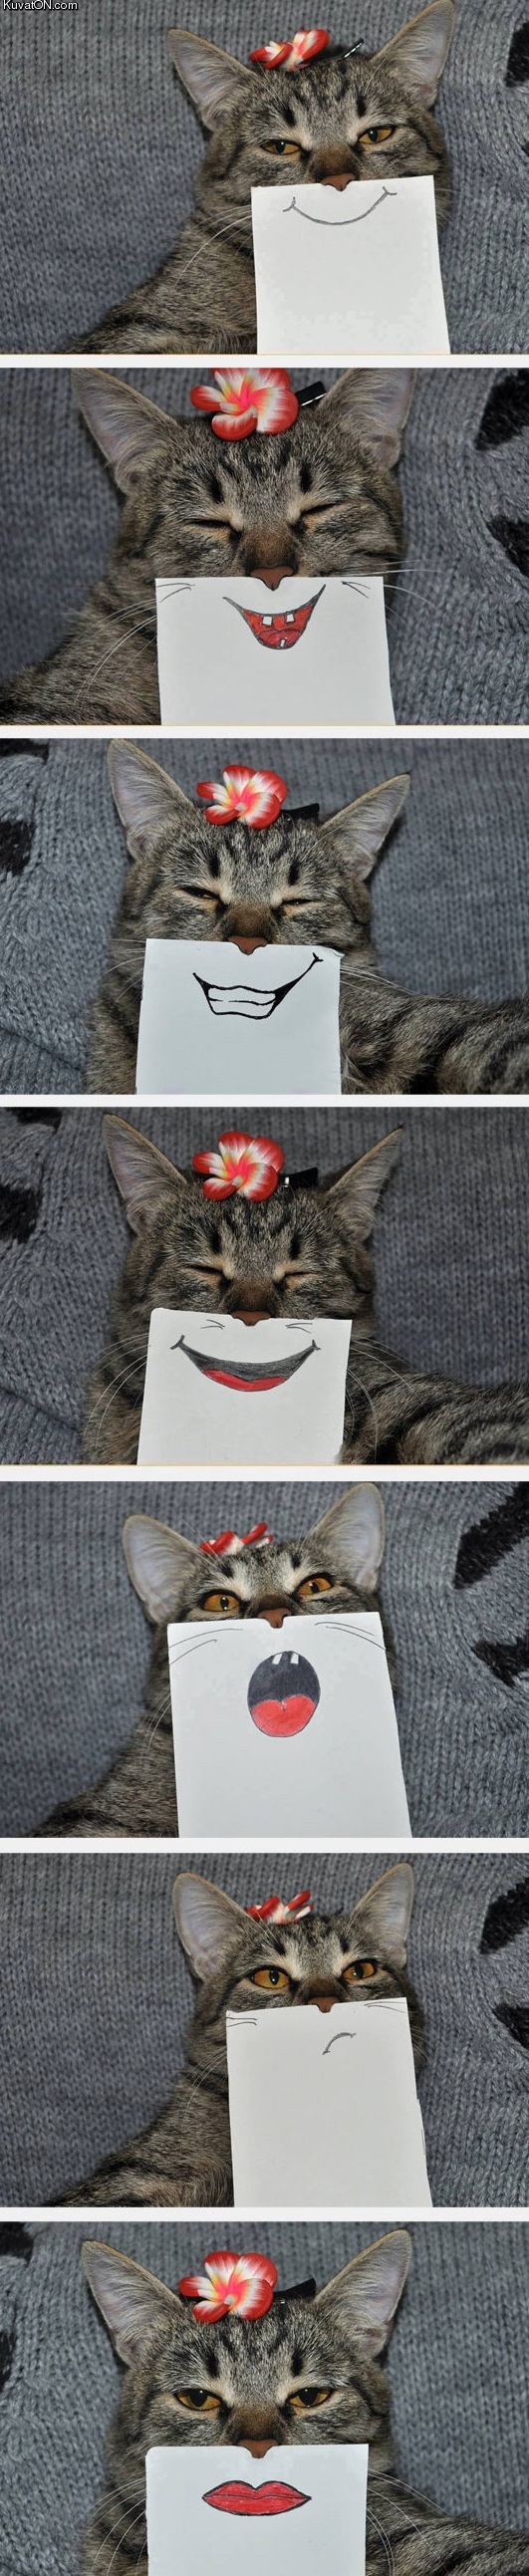 cat_with_paper_drawn_expressions.jpg